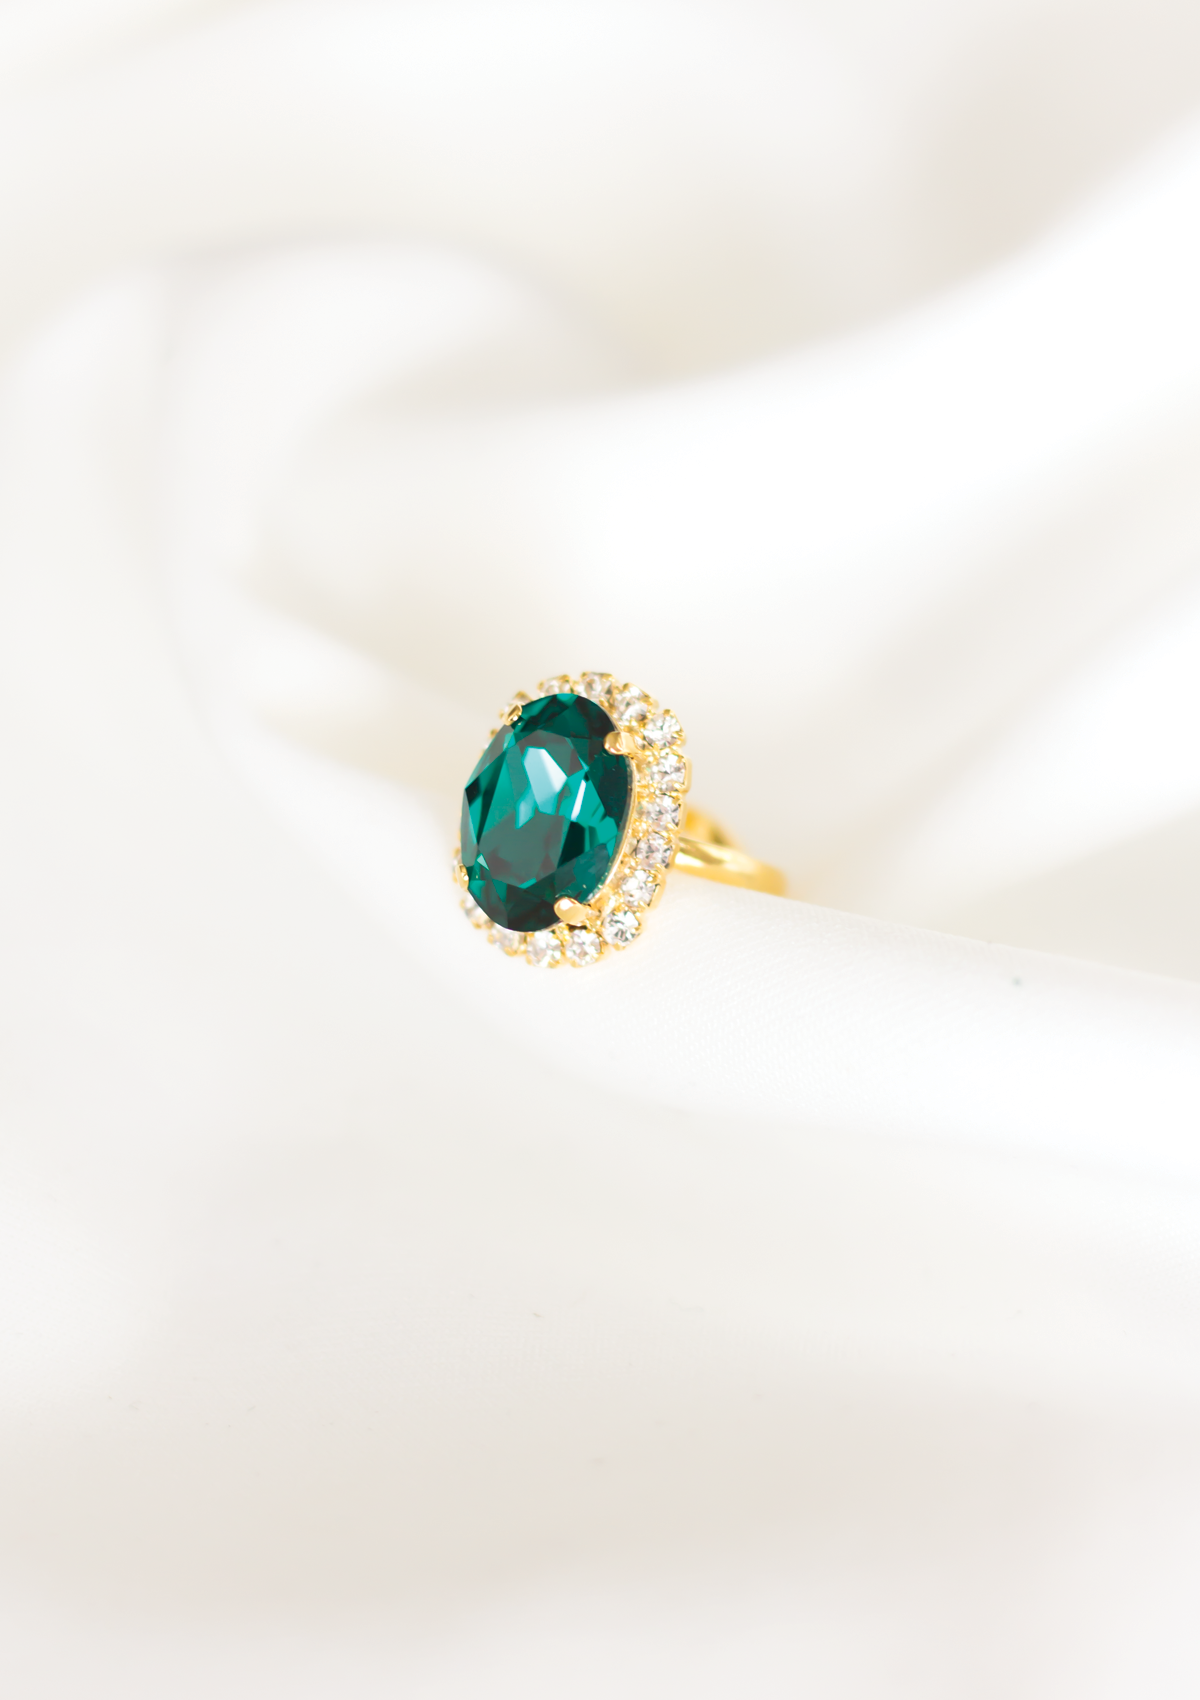 Diana Ring, jewelry designed and made by Sarah Gauci in Malta. Emerald. Gold or Rose gold plated.